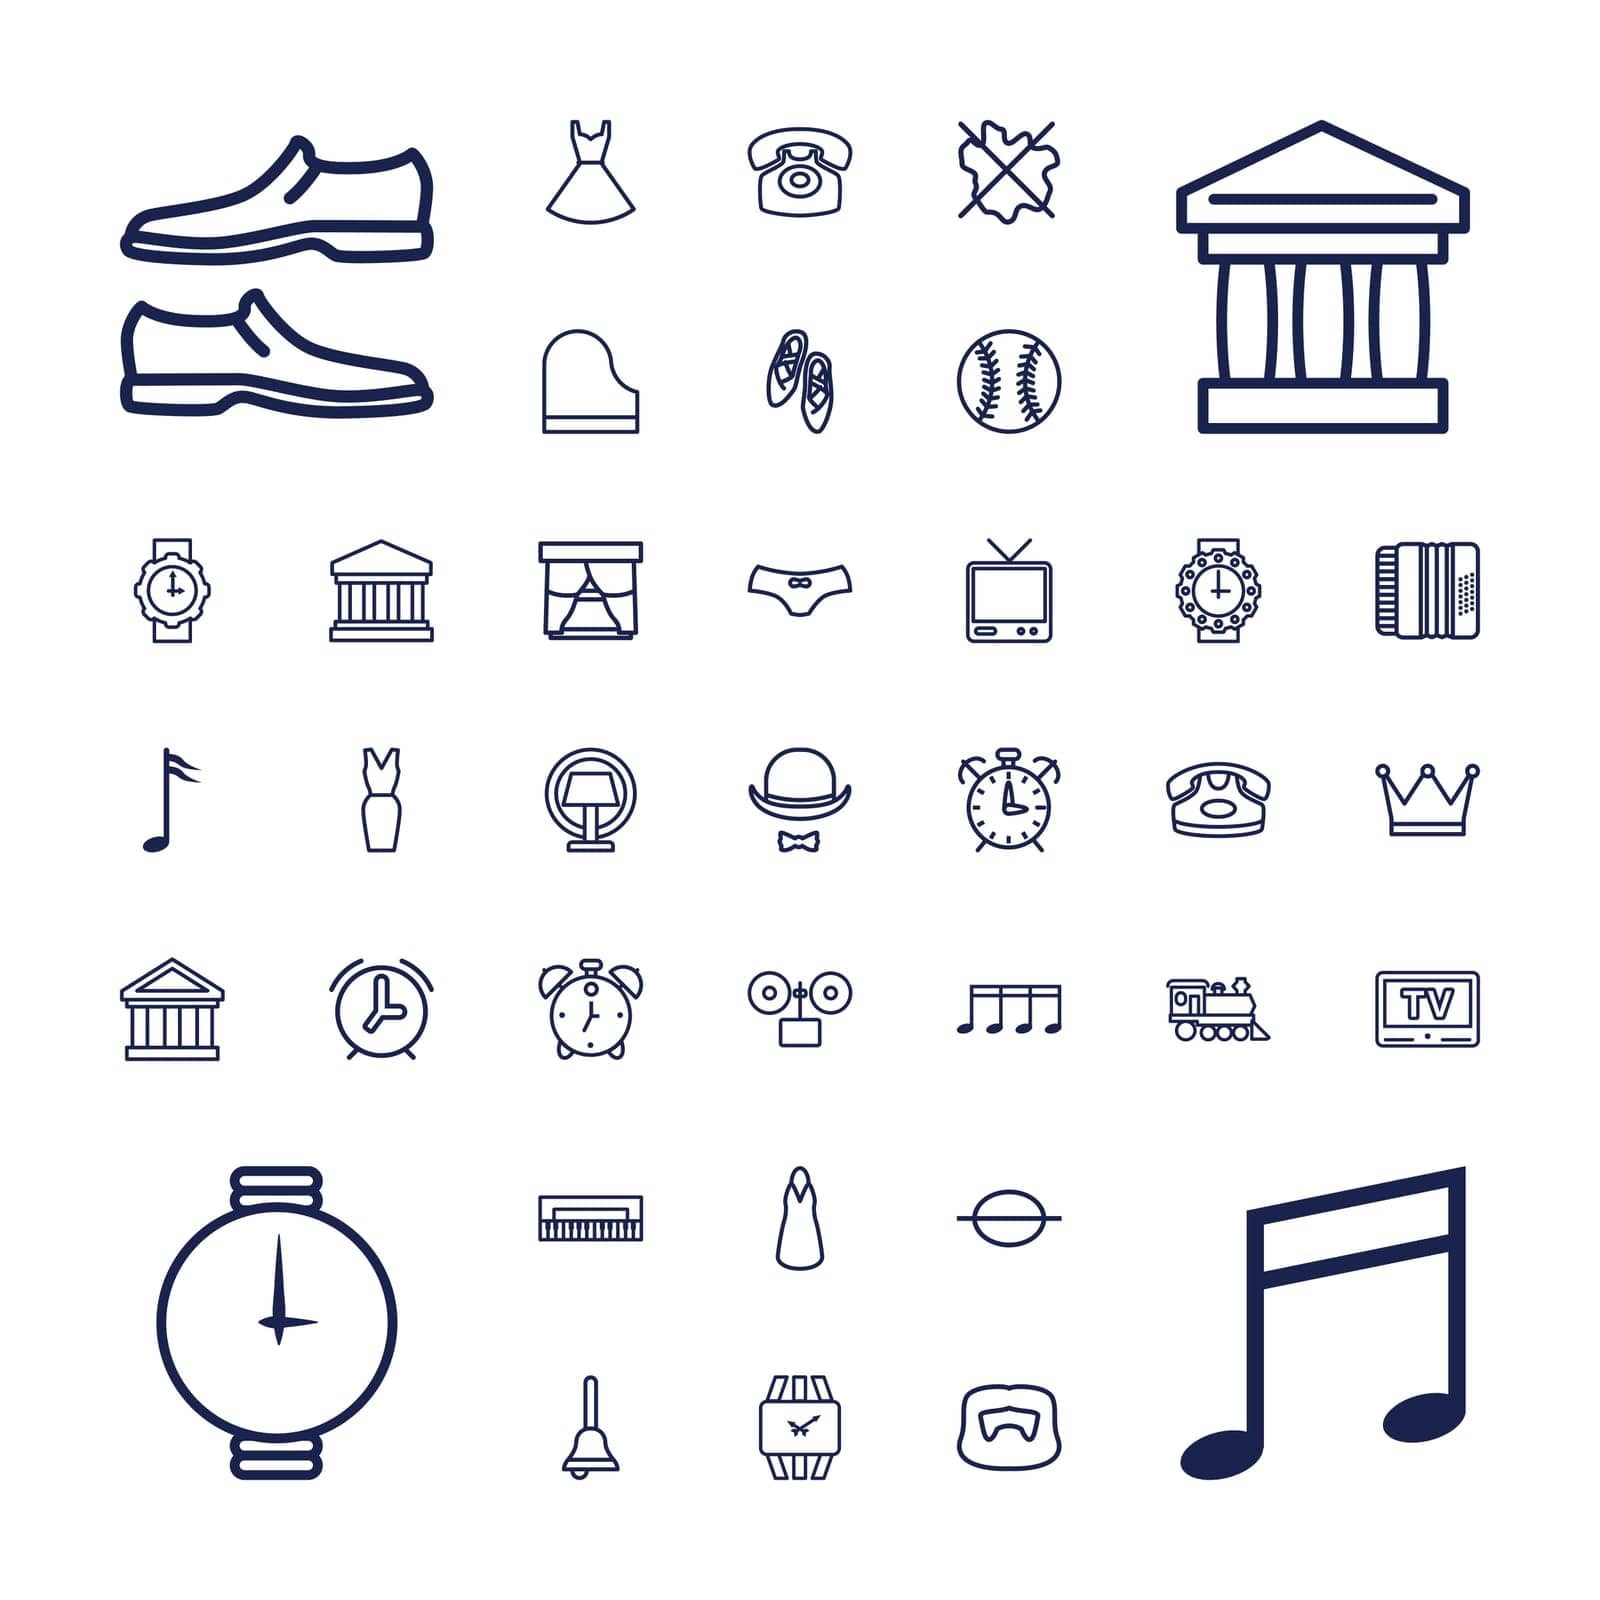 dress,symbol,no,note,tv,woman,icon,for,wrist,building,bank,piano,music,and,locomotive,alarm,underwear,hat,vector,man,female,table,shoe,harmonic,crown,moustache,set,wash,lamp,ballet,court,bell,shoes,hairstyle,classic,phone,watch,desk,baseball,illustration,window